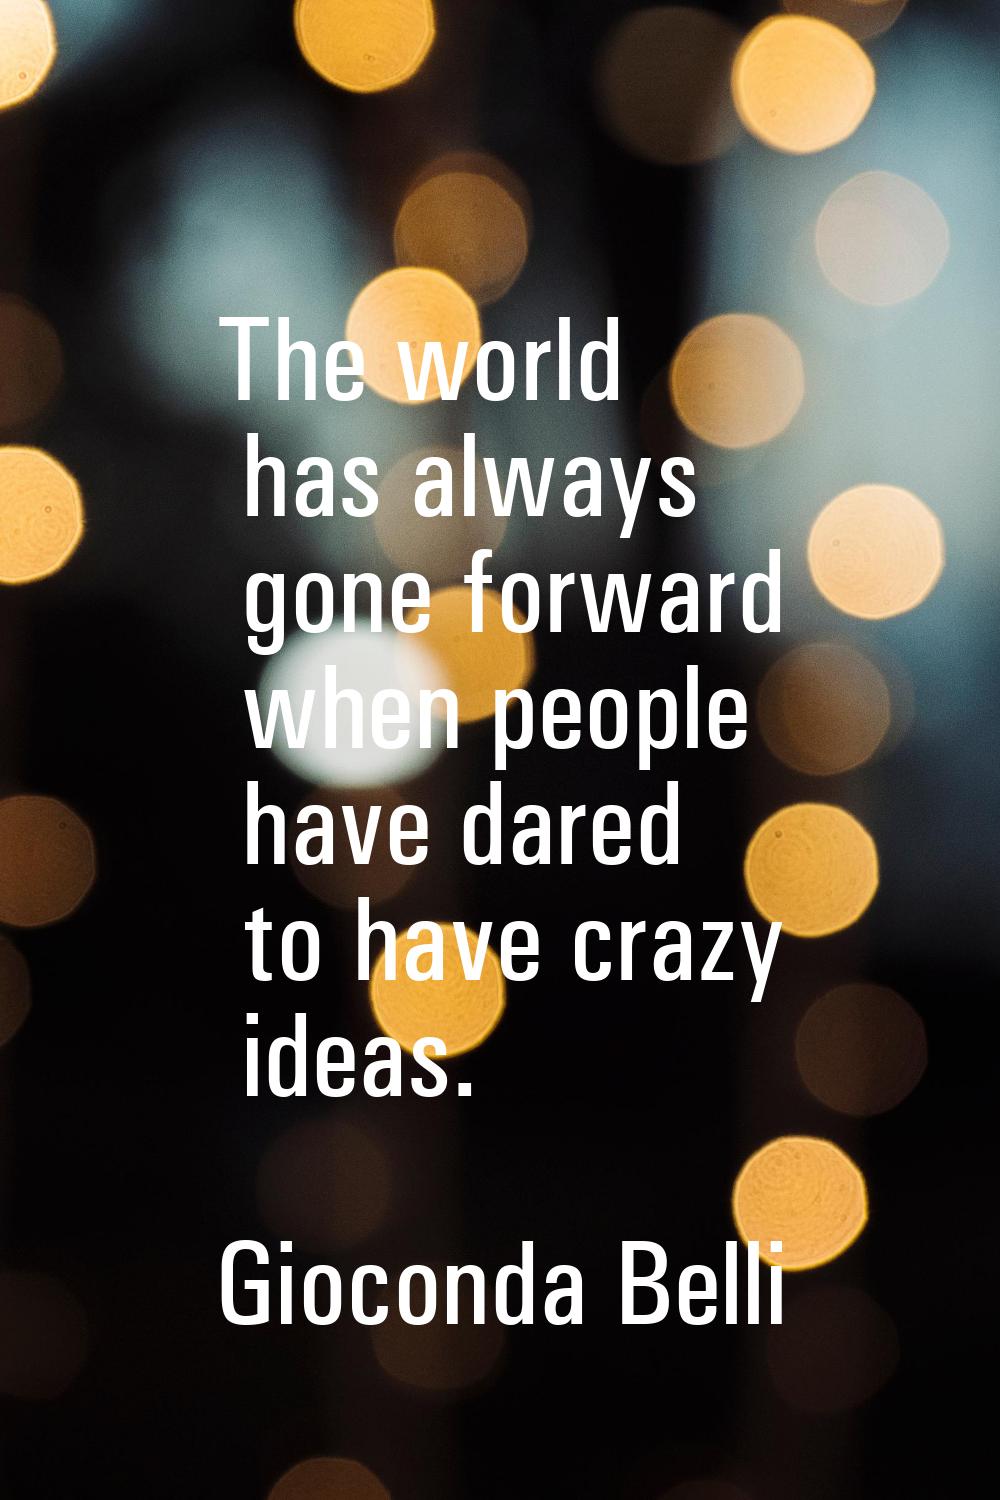 The world has always gone forward when people have dared to have crazy ideas.